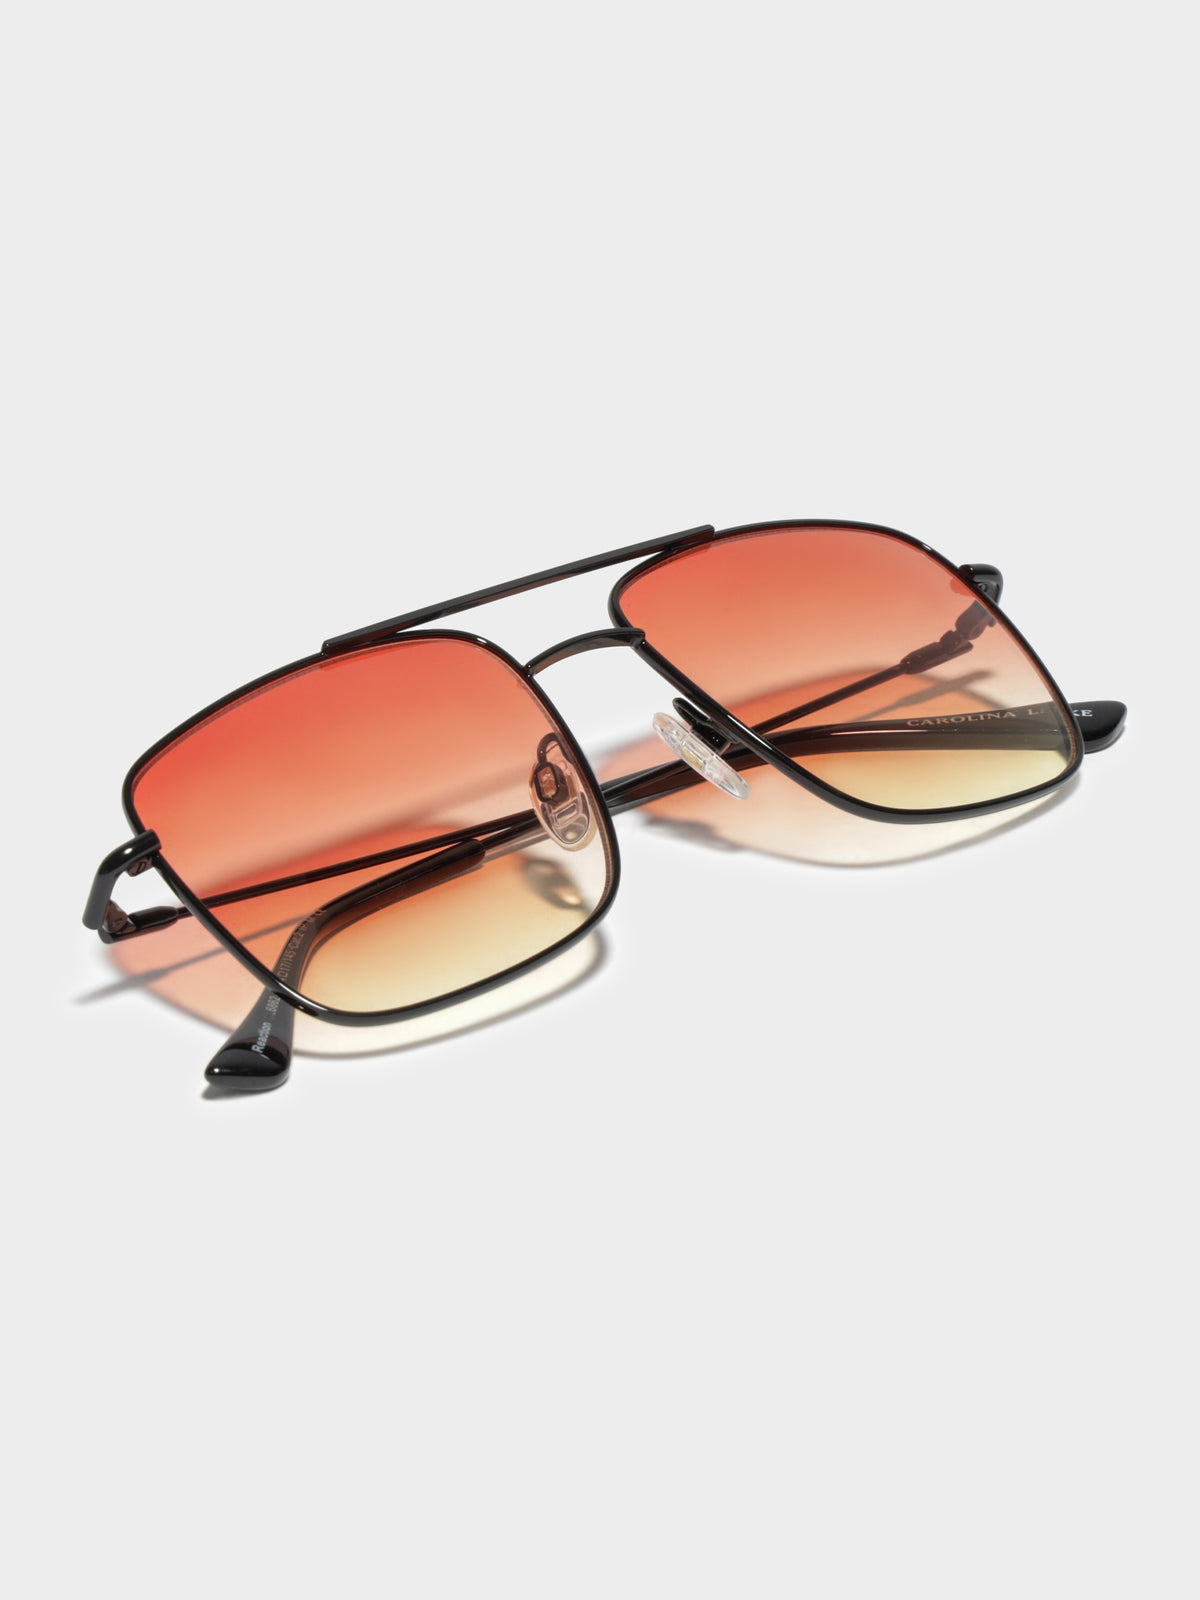 CL686201 Reaction Sunglasses in Black Sunset